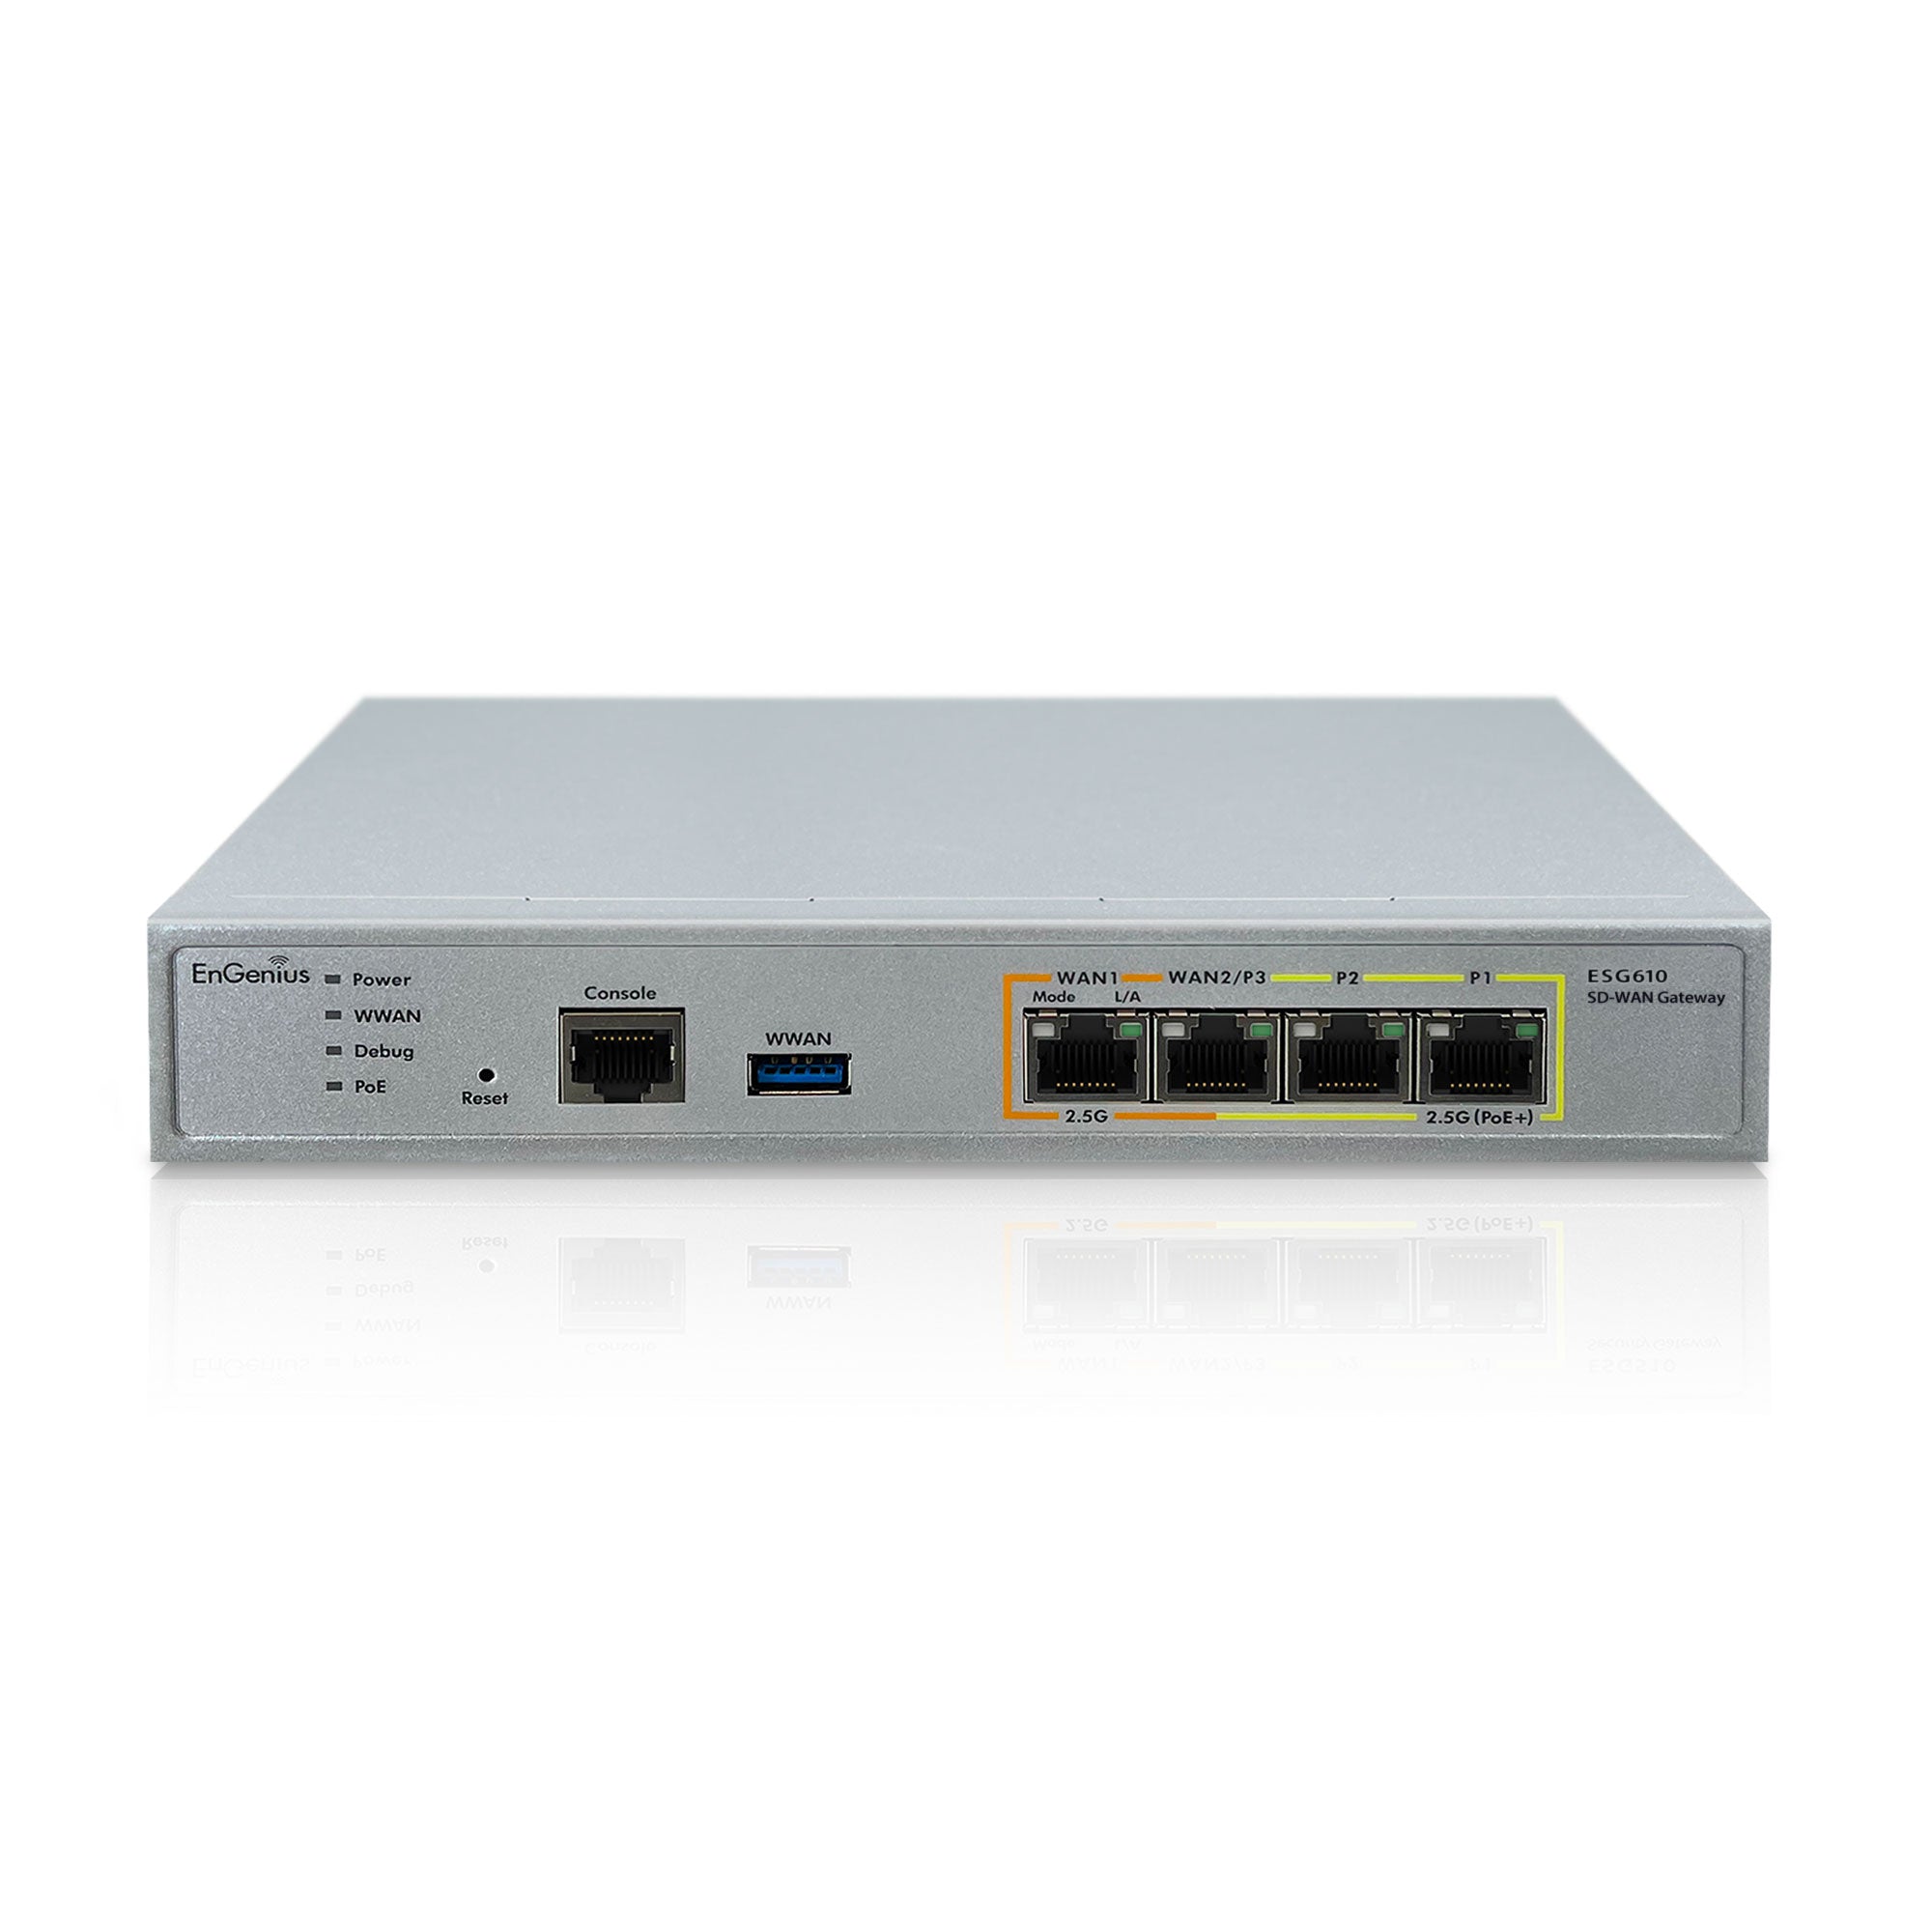 ESG610: Cloud Managed SD-WAN Security Gateway with Quad Core 2.2GHz and 4x 2.5G ports